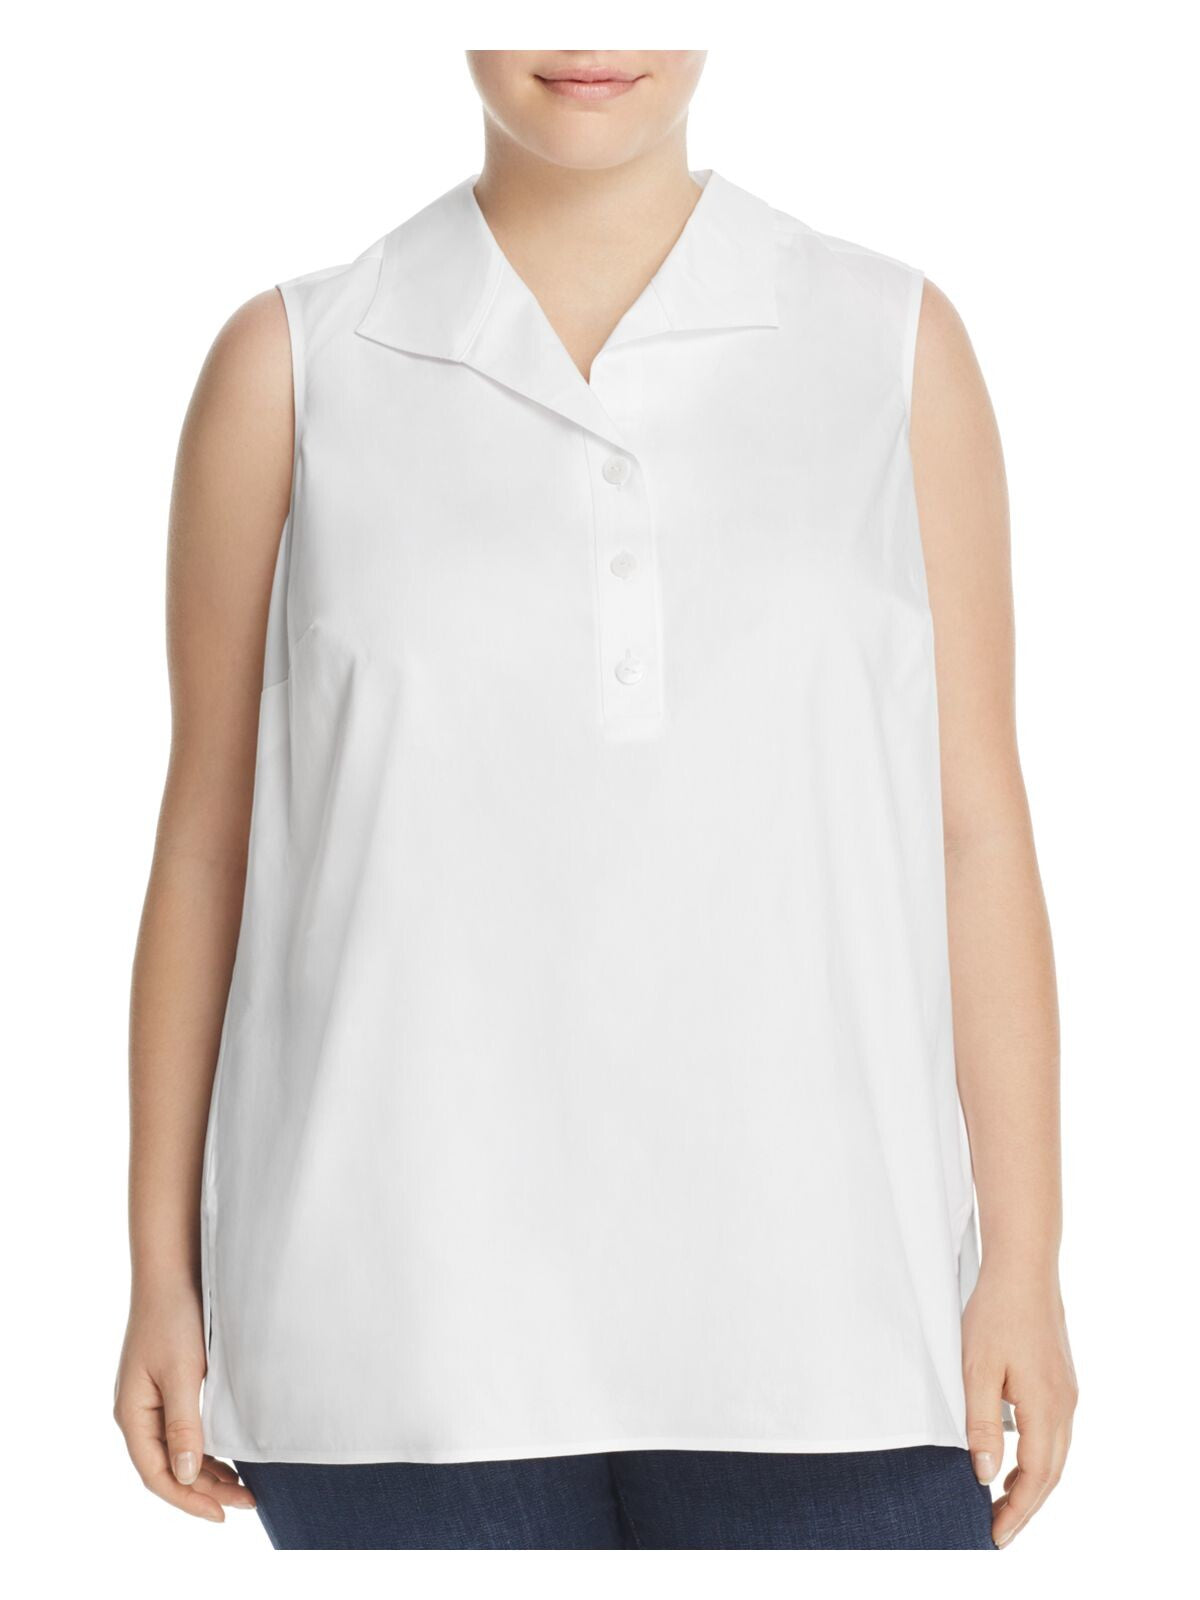 FOXCROFT Womens White Stretch Darted Button Back Sleeveless Collared Blouse Plus 16W